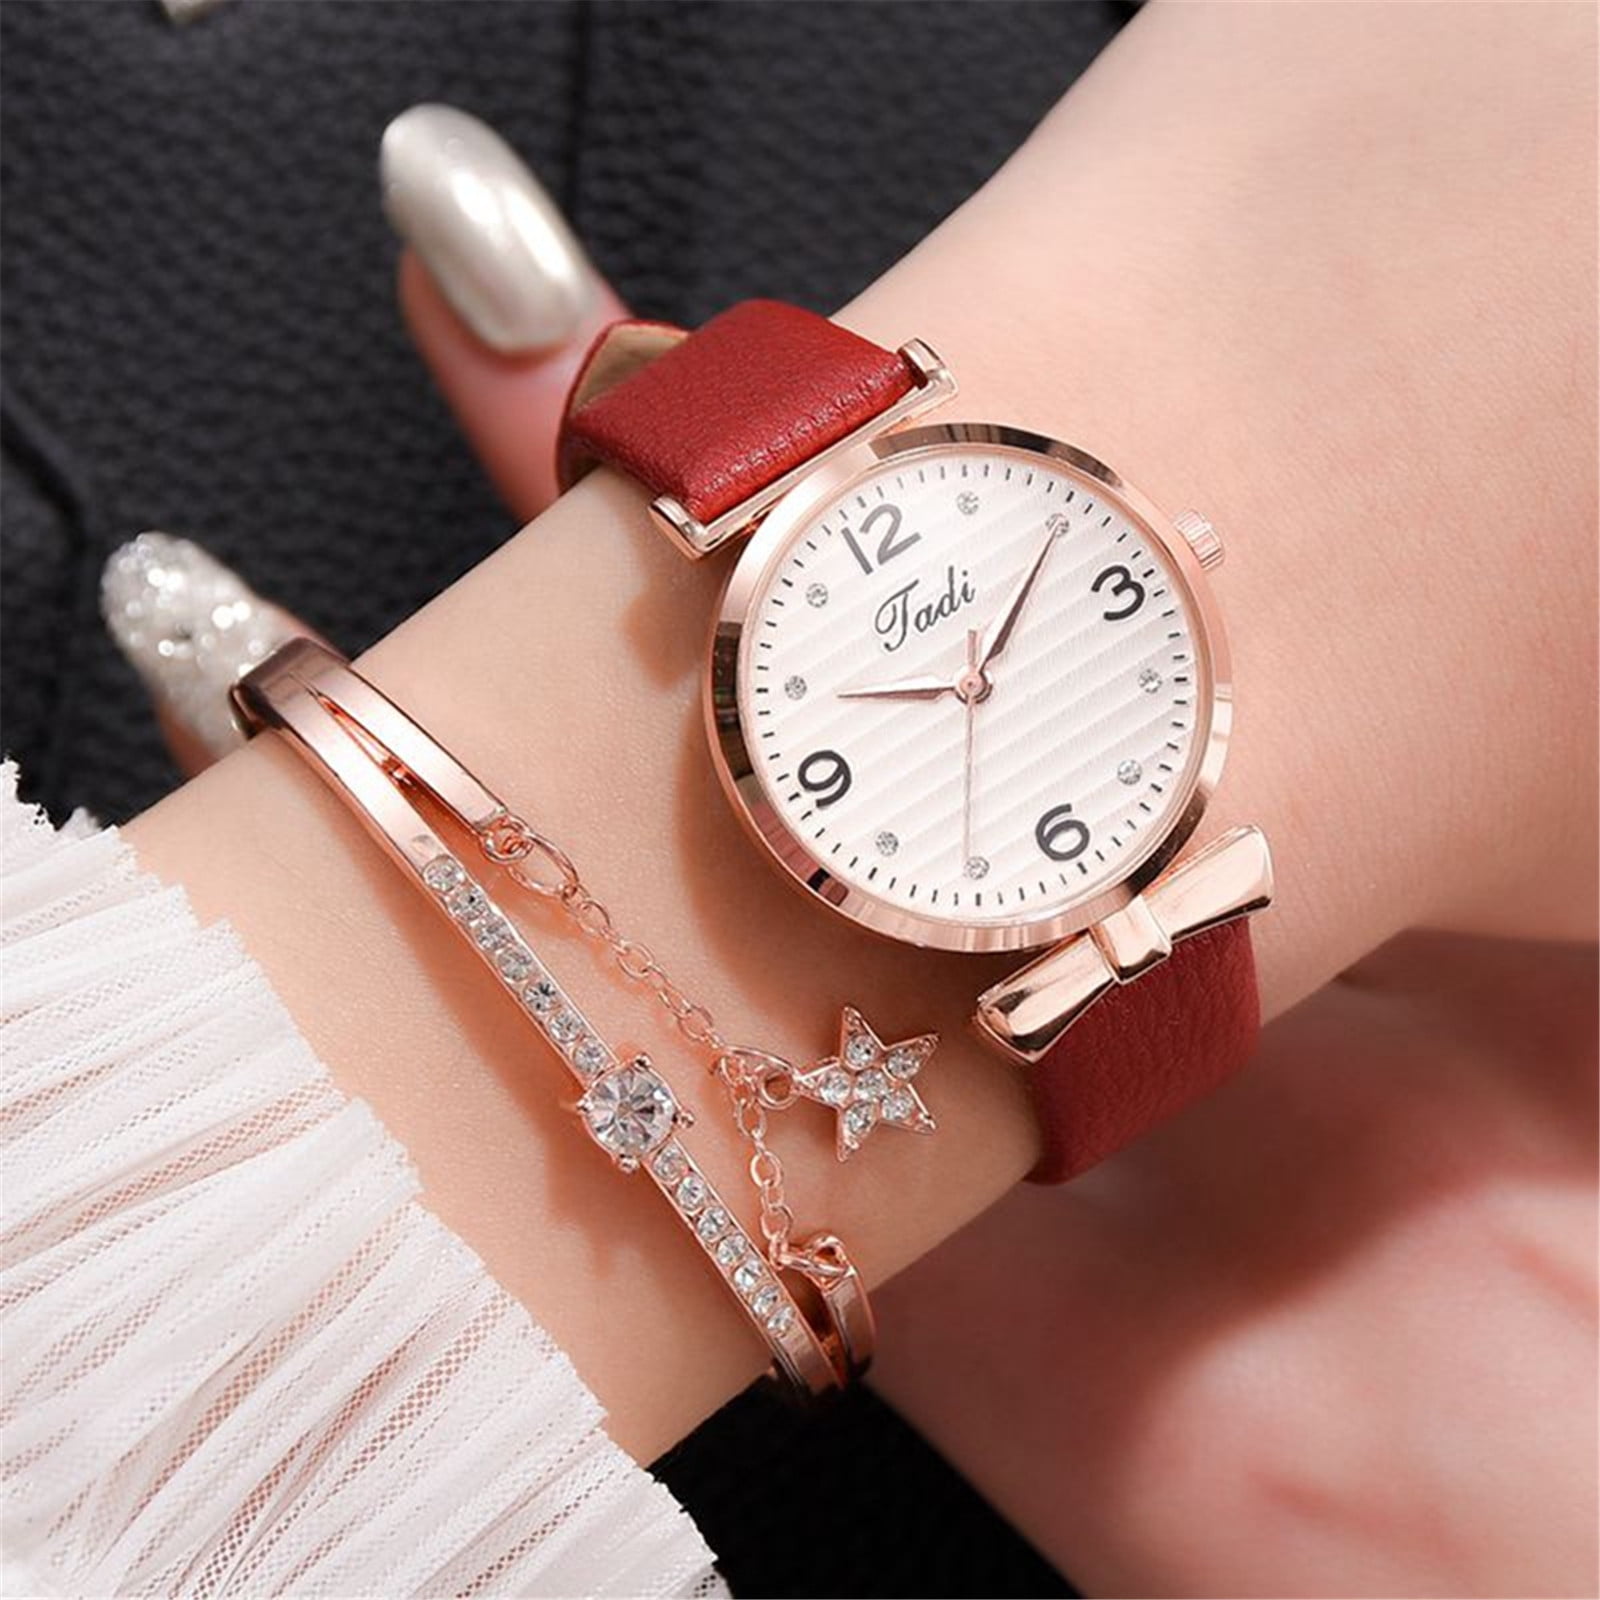 Ausyst Watch for Women Jadi Fashion Casual High-quality Compact Exquisite  Ladies Bracelet Watch Set on Sale Clearance